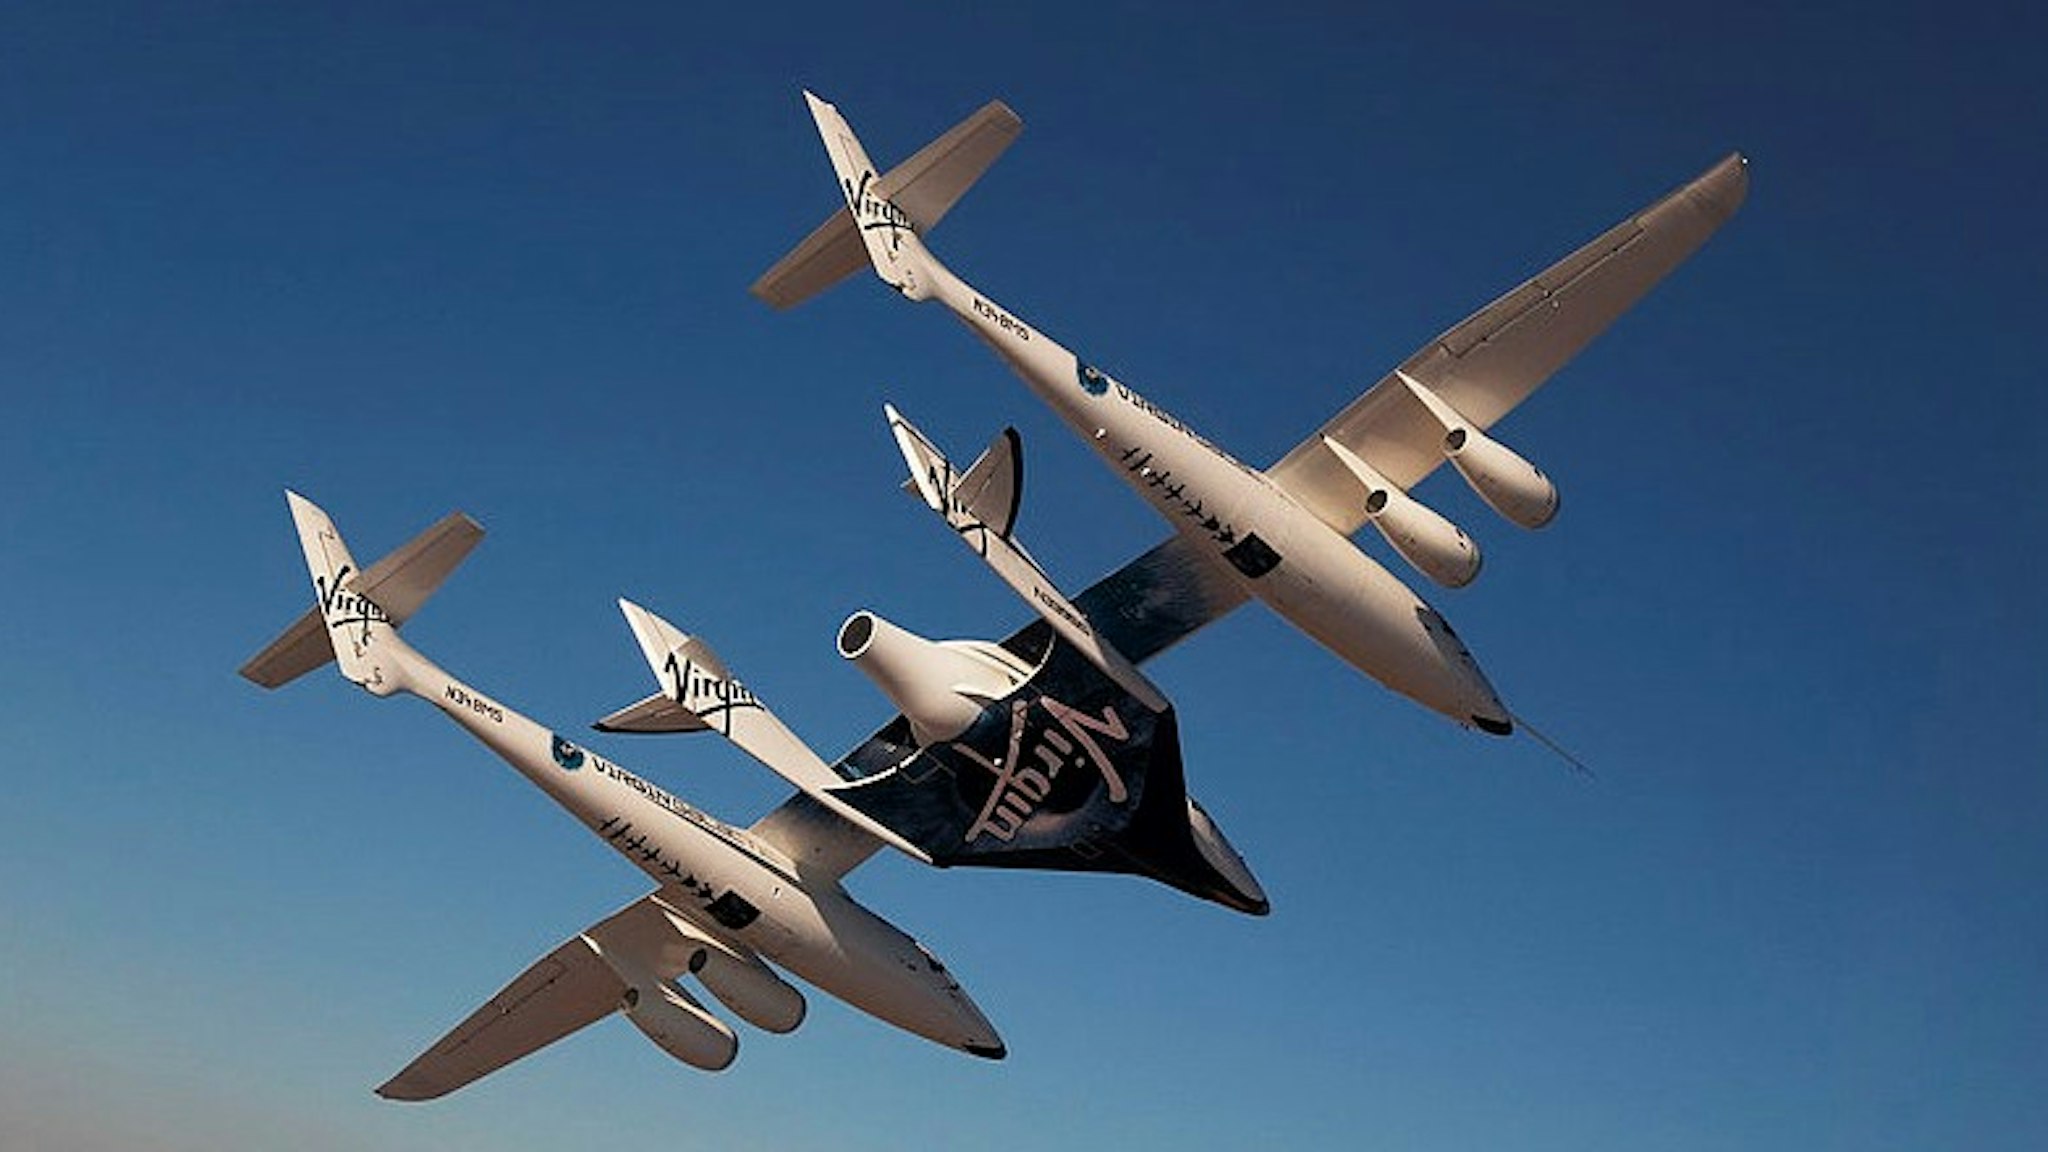 MOJAVE, UNITED STATES - JULY 15: (EDITORIAL USE ONLY, NO SUBJECT SPECIFIC TV BROADCAST DOCUMENTARIES OR BOOK USE) Virgin Galactic vehicles WhiteKnightTwo and SpaceShipTwo in flight during captive carry test flight at Mojave on July 15, 2010 in California. (Photo by